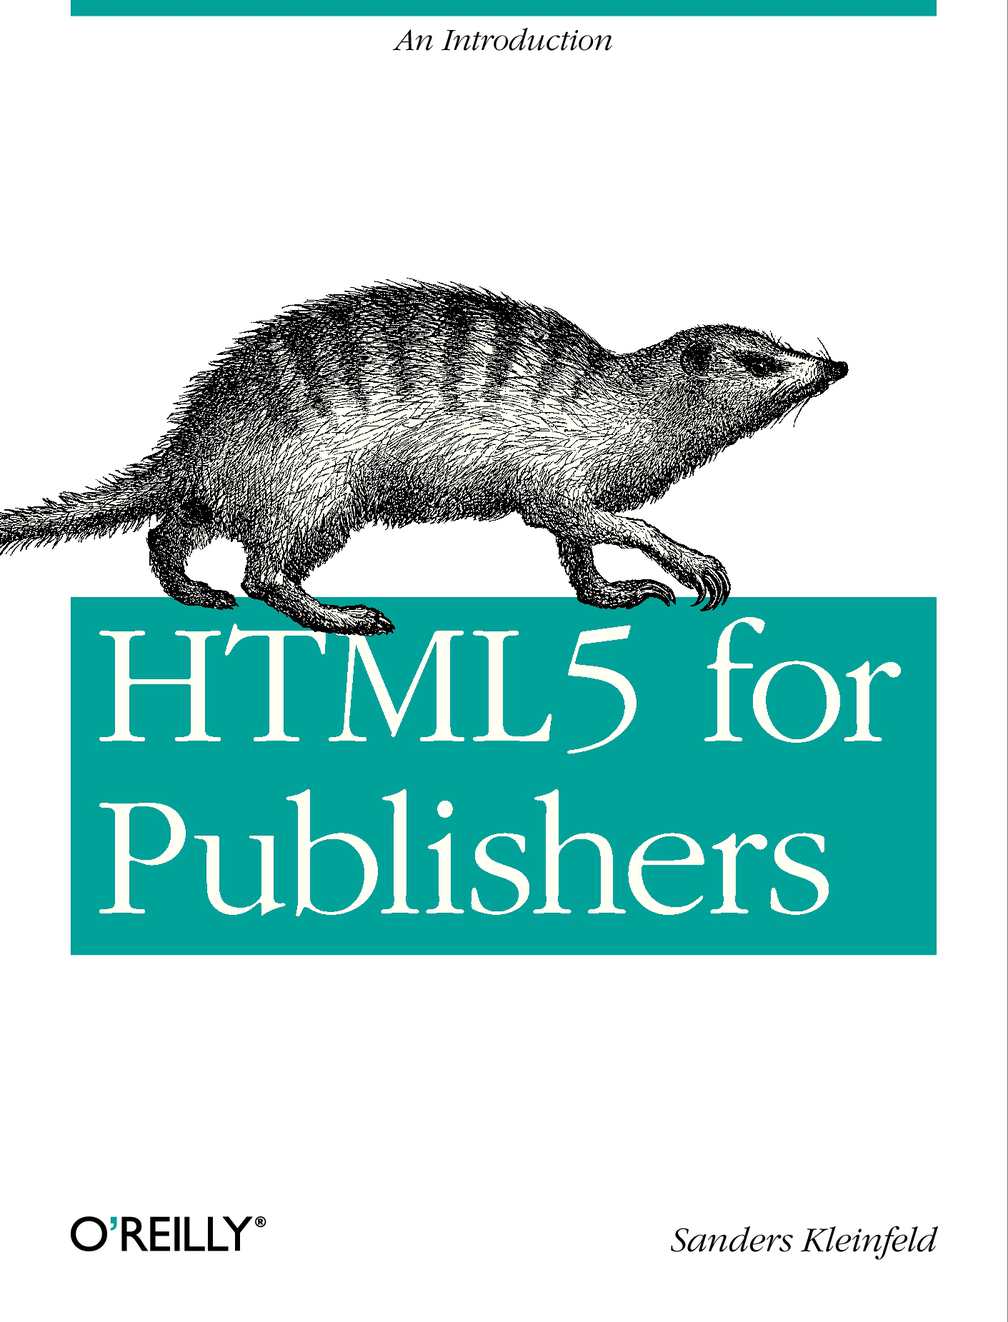 HTML5 for Publishers by Sanders Kleinfeld